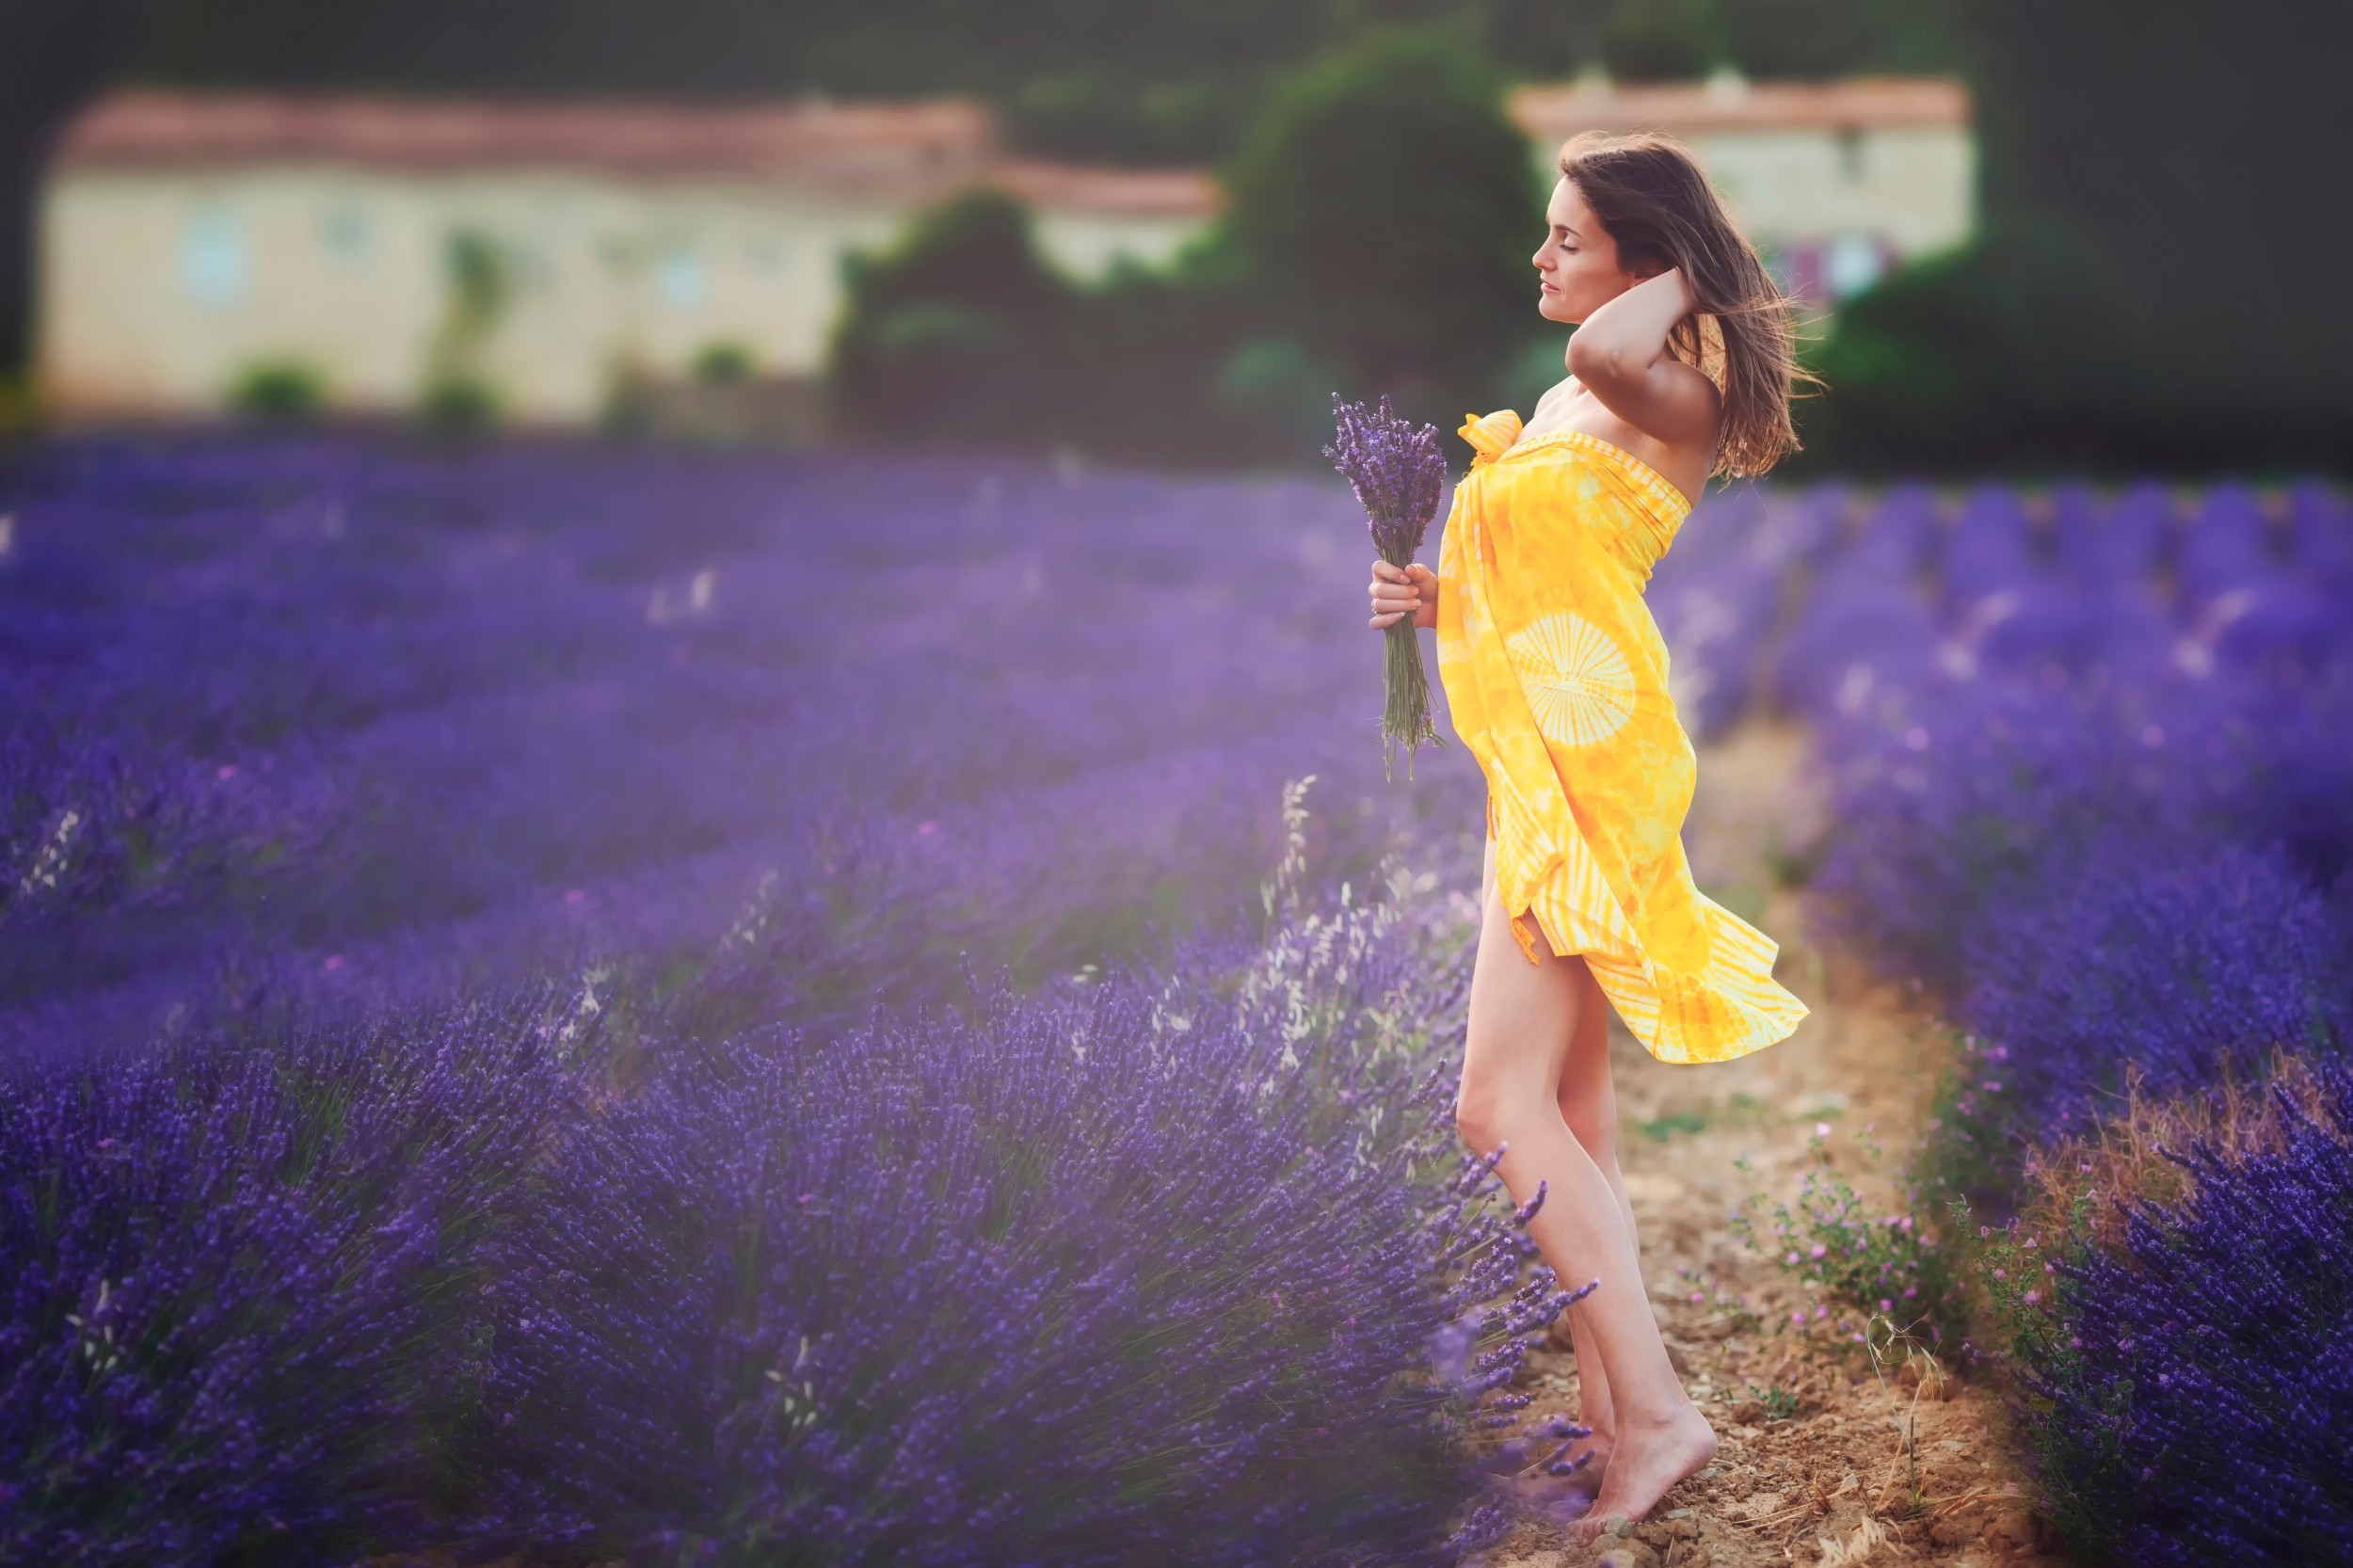 A girl in a yellow dress among the lavender fields